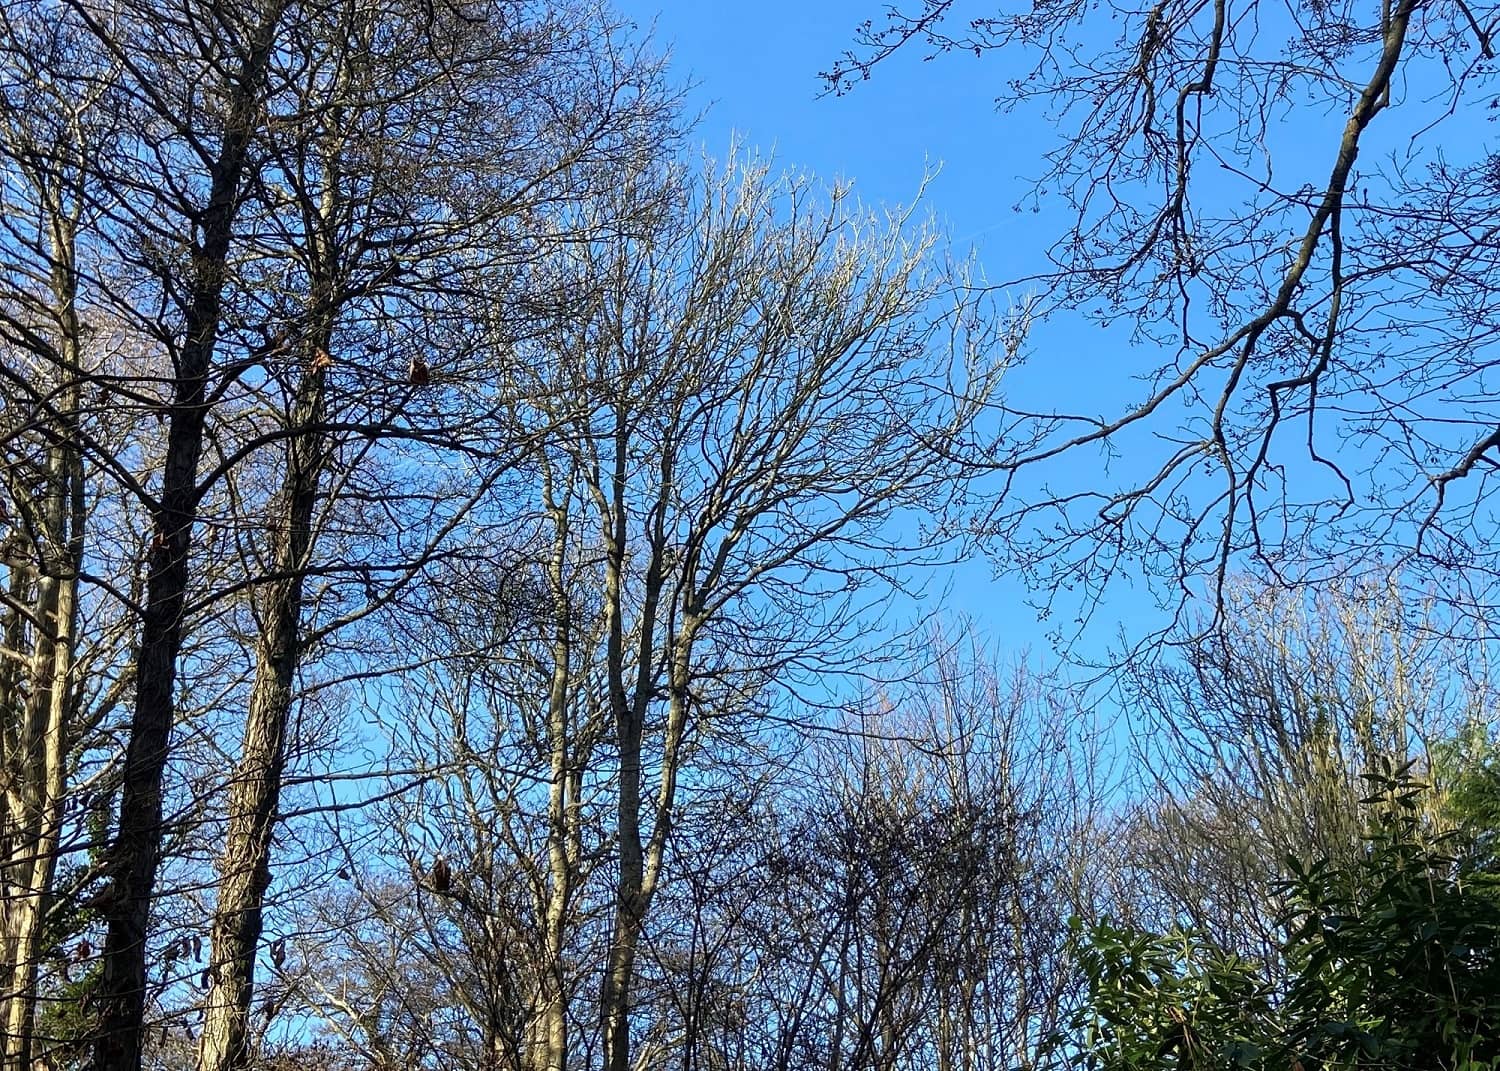 Looking up at ash trees with blue sky in background